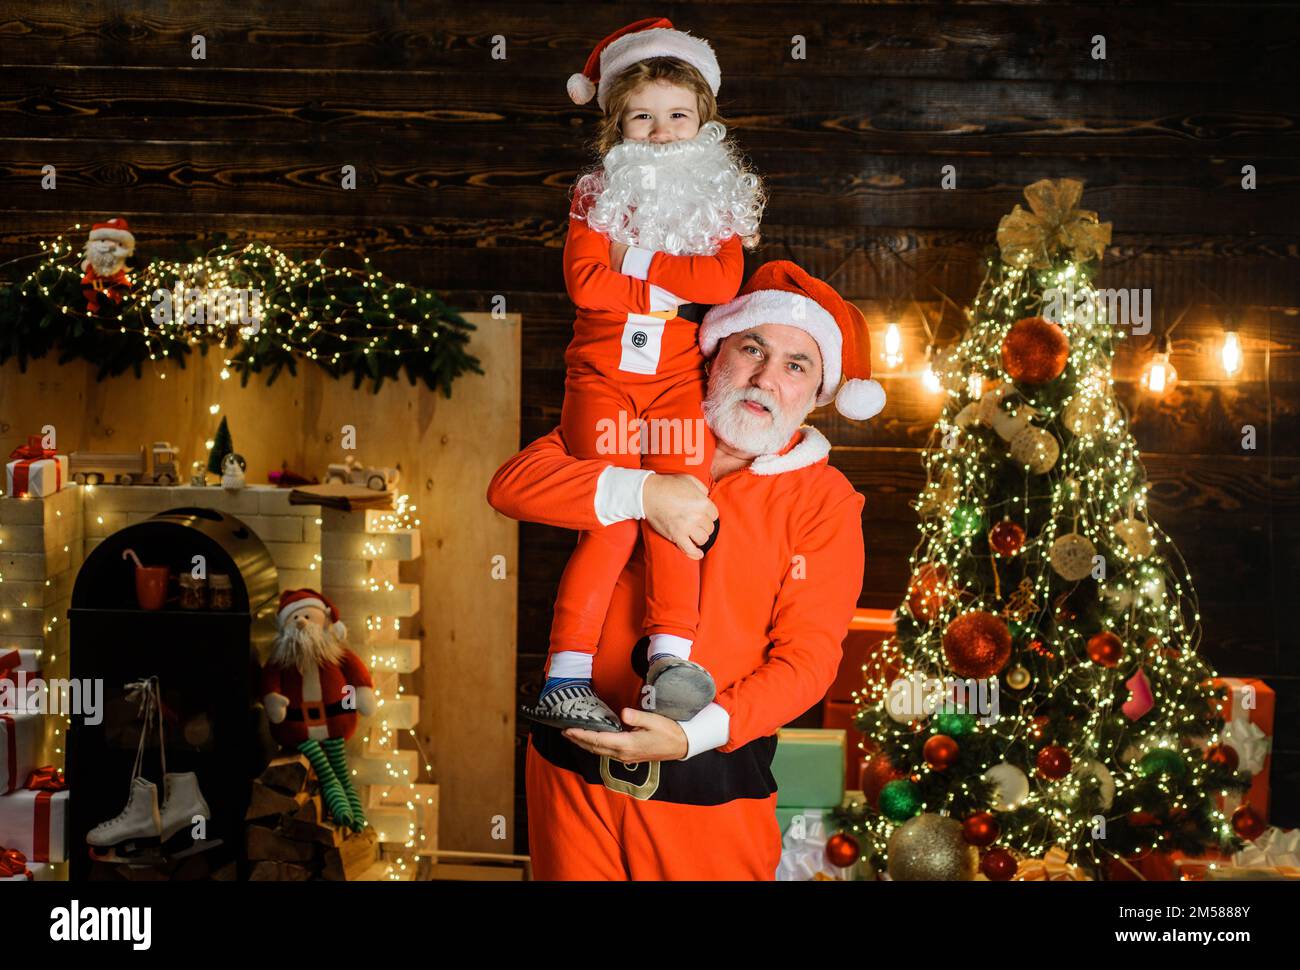 Merry Christmas and happy New Year. Santa Claus with little helper. Winter holidays. Stock Photo